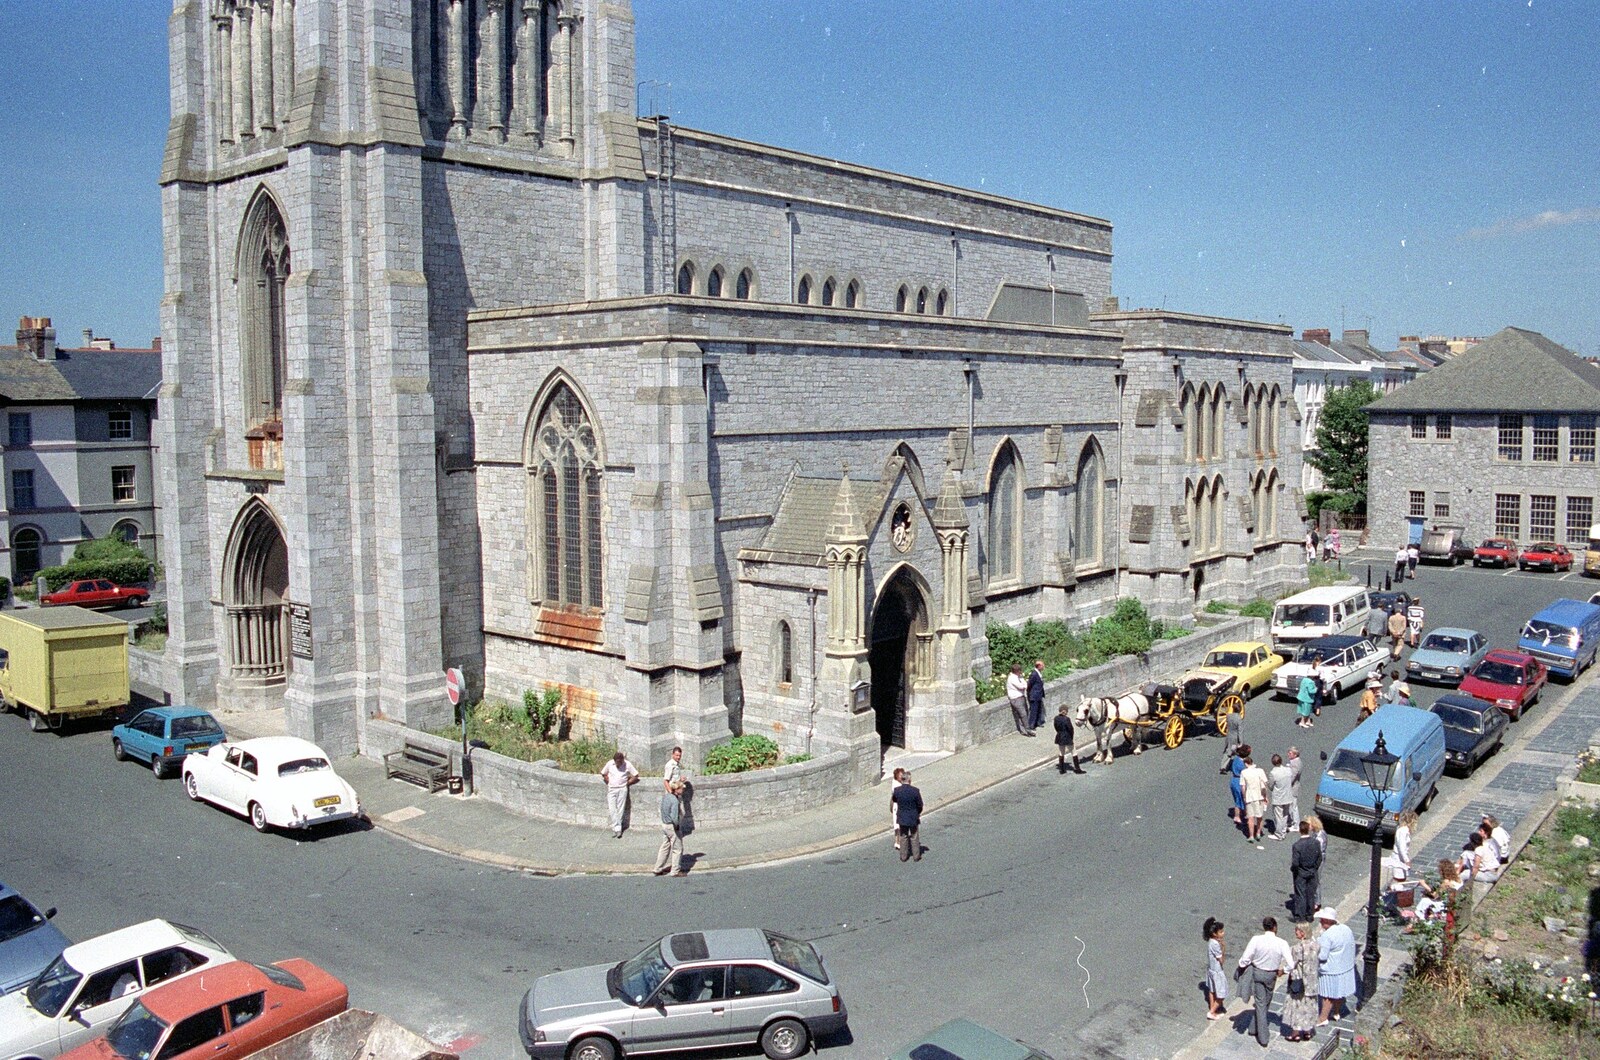 Uni: Risky Business, A Wedding Occurs and Dave Leaves, Wyndham Square, Plymouth - 15th July 1989: The church of St. Peter's in Wyndham Square